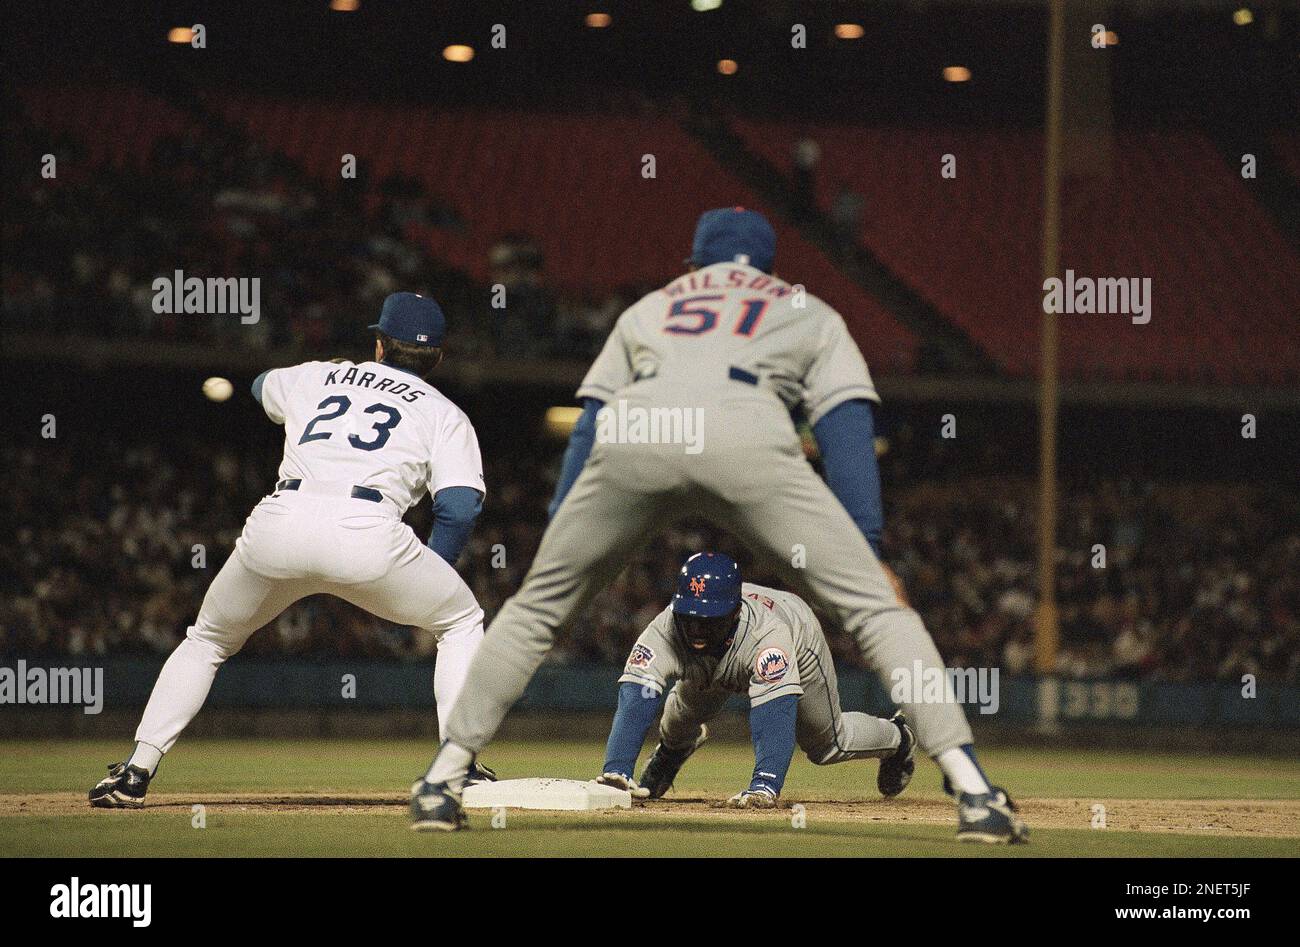 Carl Everett of the New York Mets, center, dives back to first